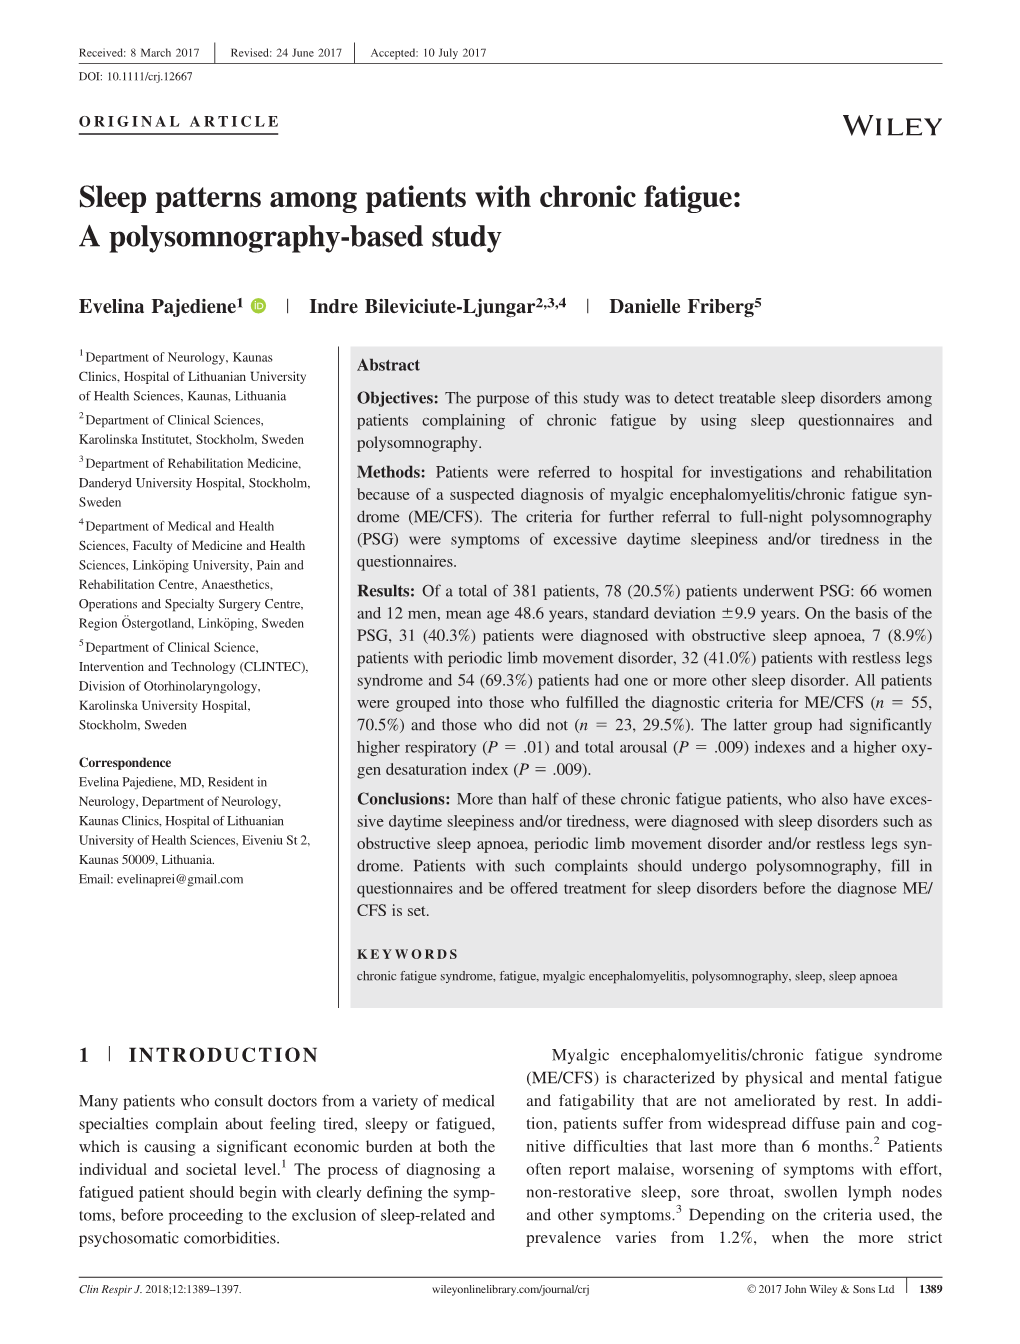 Sleep Patterns Among Patients with Chronic Fatigue: a Polysomnography&#8208;Based Study